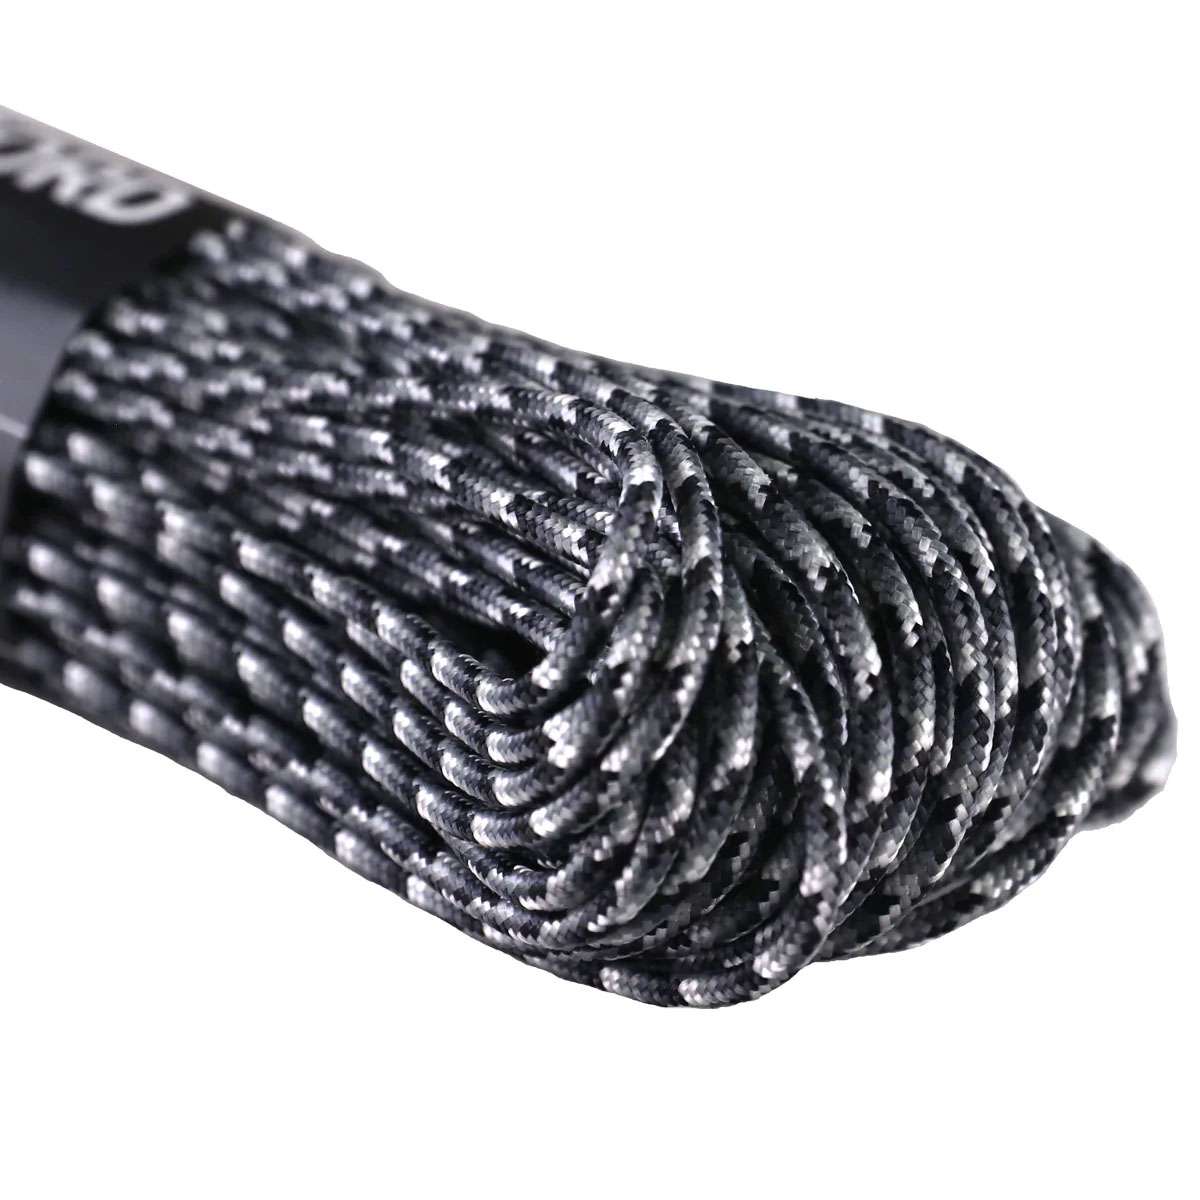 Atwood Rope Tactical 275 Cord 4 Strand - 30m Lengths